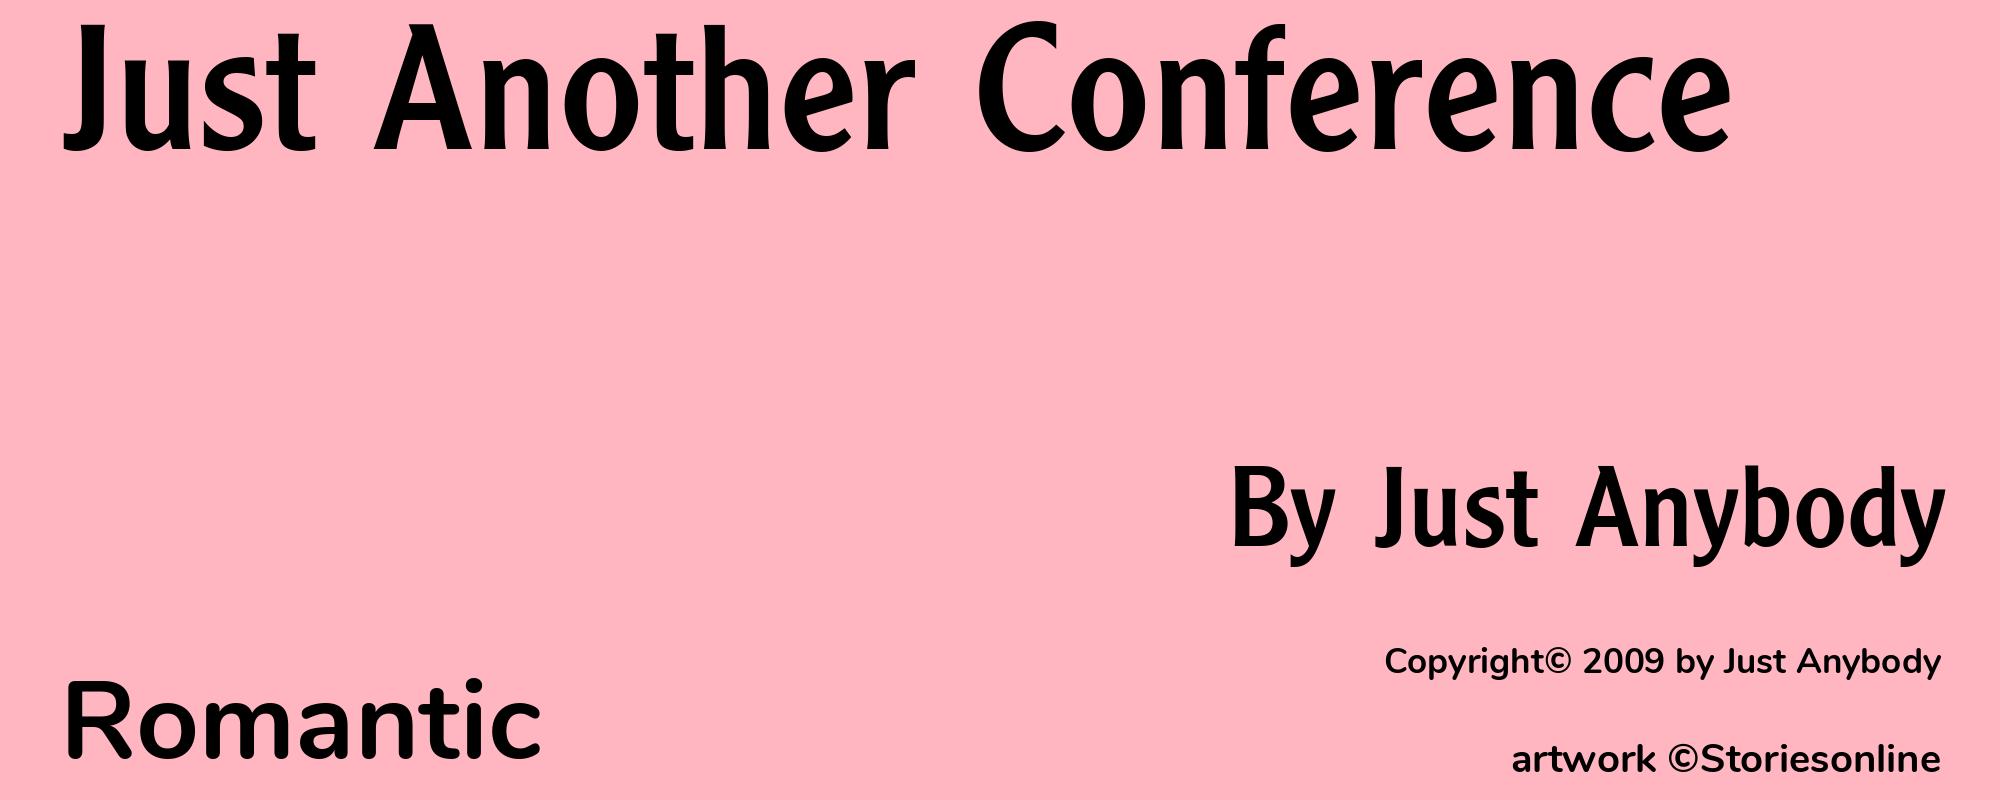 Just Another Conference - Cover